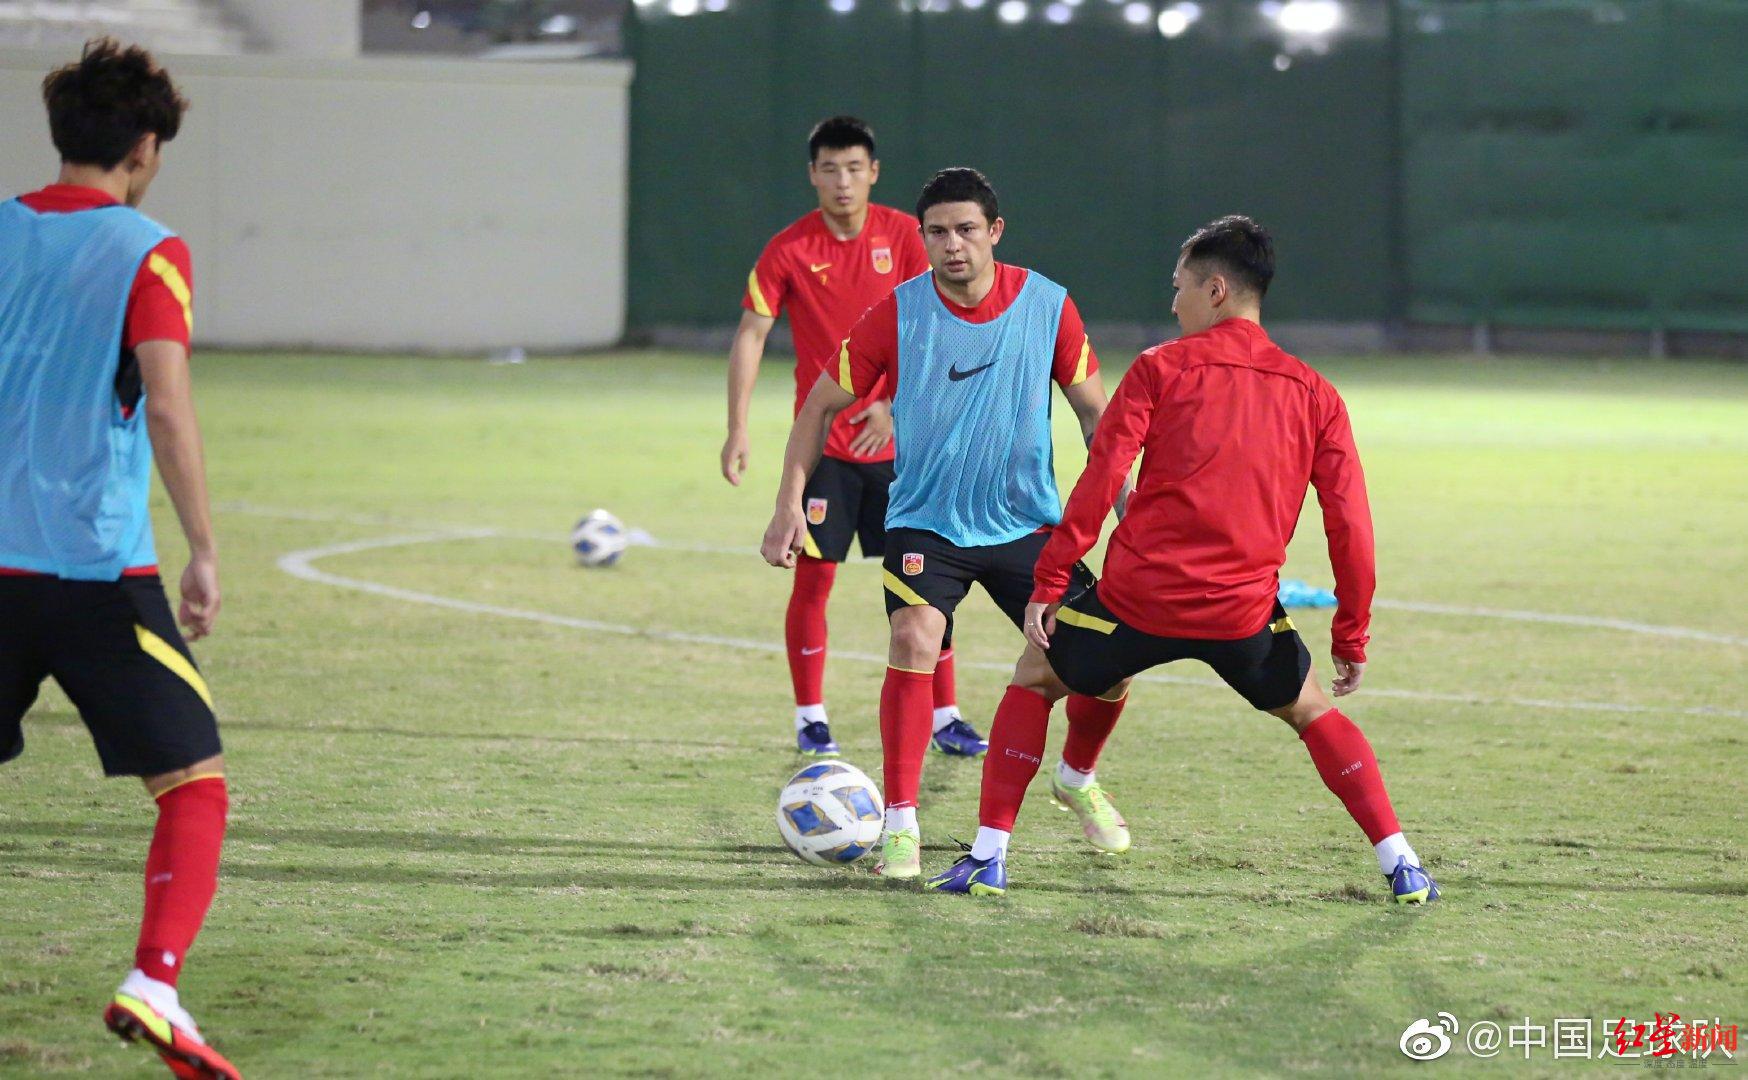 On November 13, local time, the national football team practiced twice a day according to the Chinese football team's Weibo